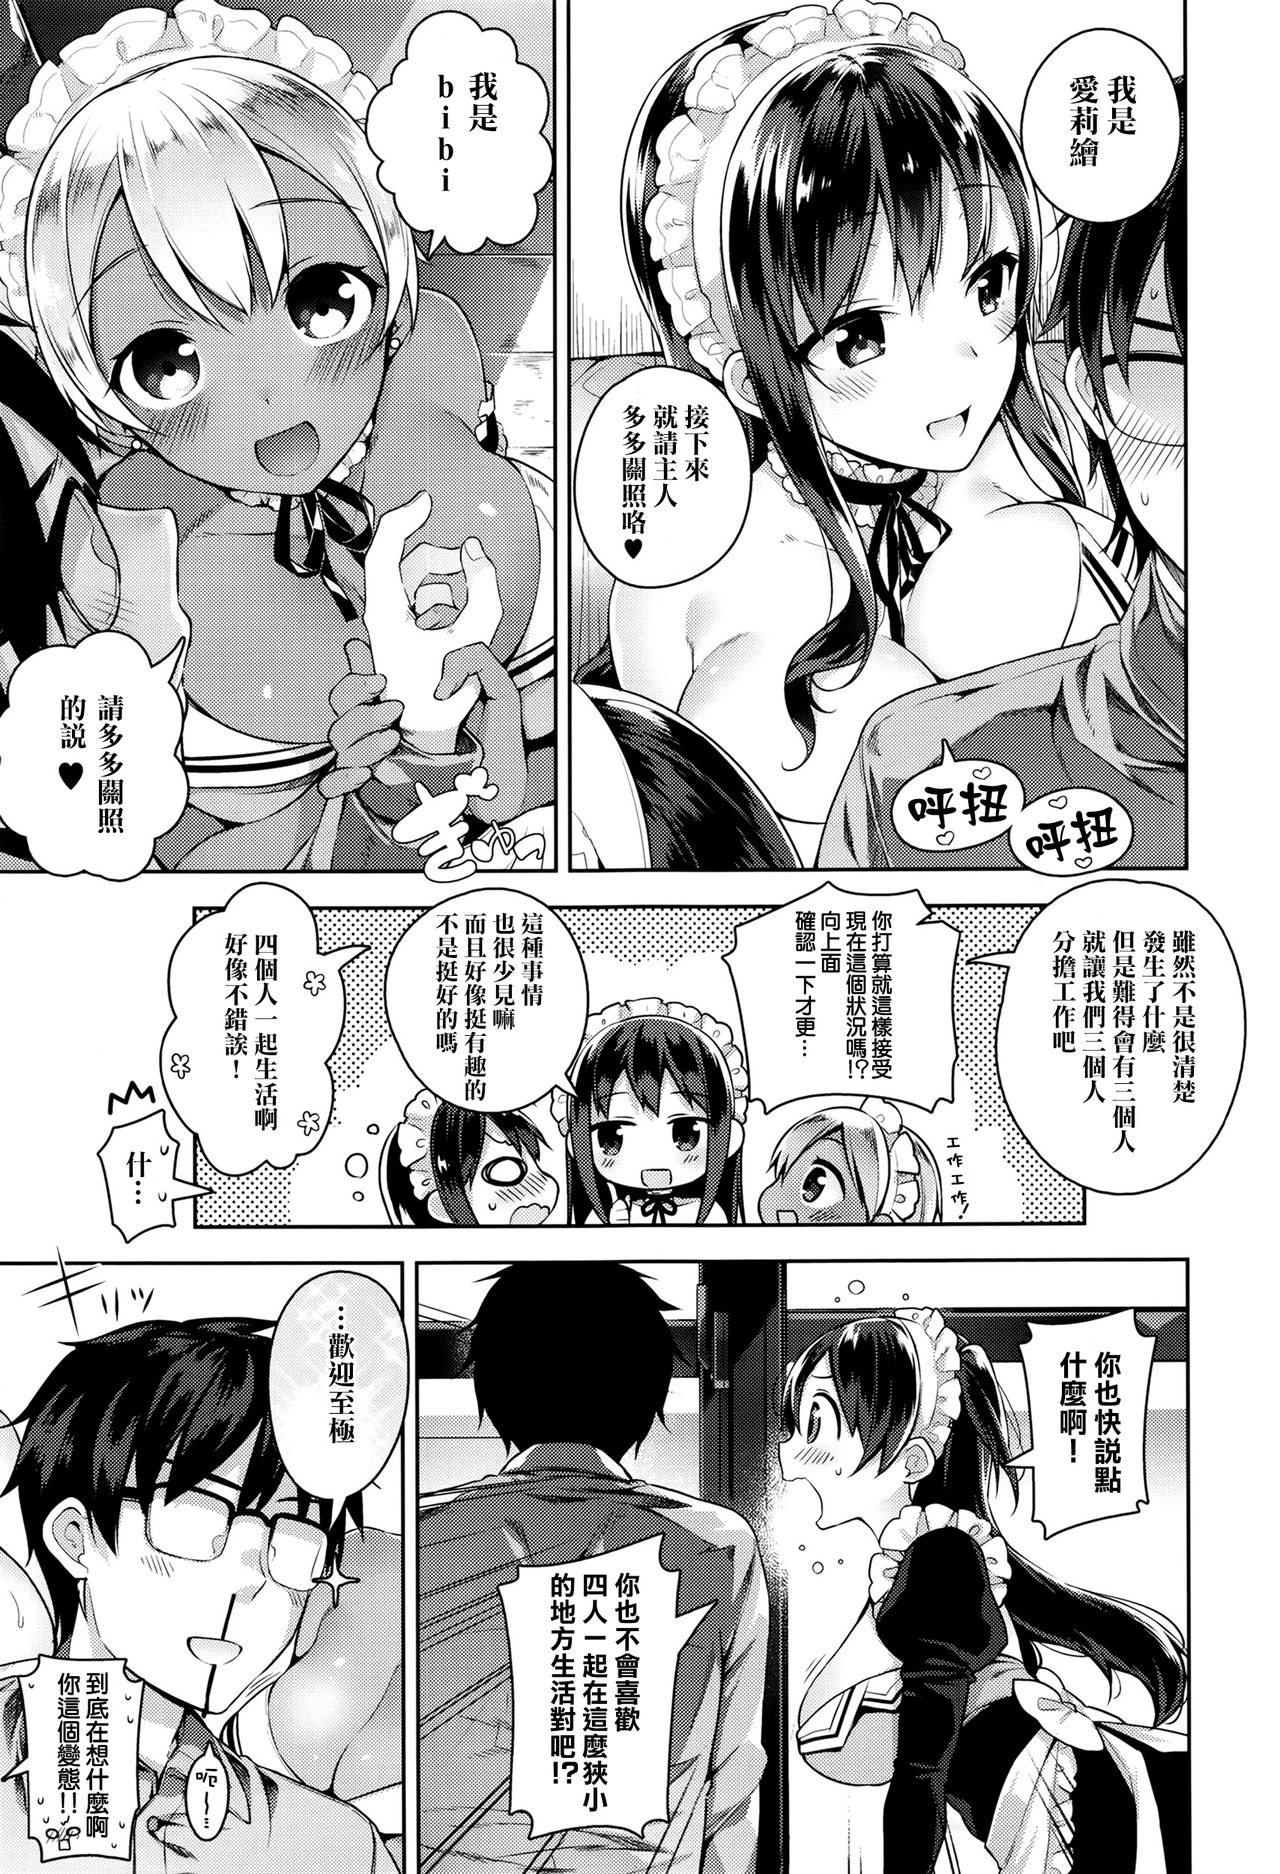 [Neet] Erie Dere - Please choose me, my master. (COMIC ExE 01) [Chinese] [无毒汉化组] [にぃと] エリエデレ (コミック エグゼ 01) [中国翻訳]